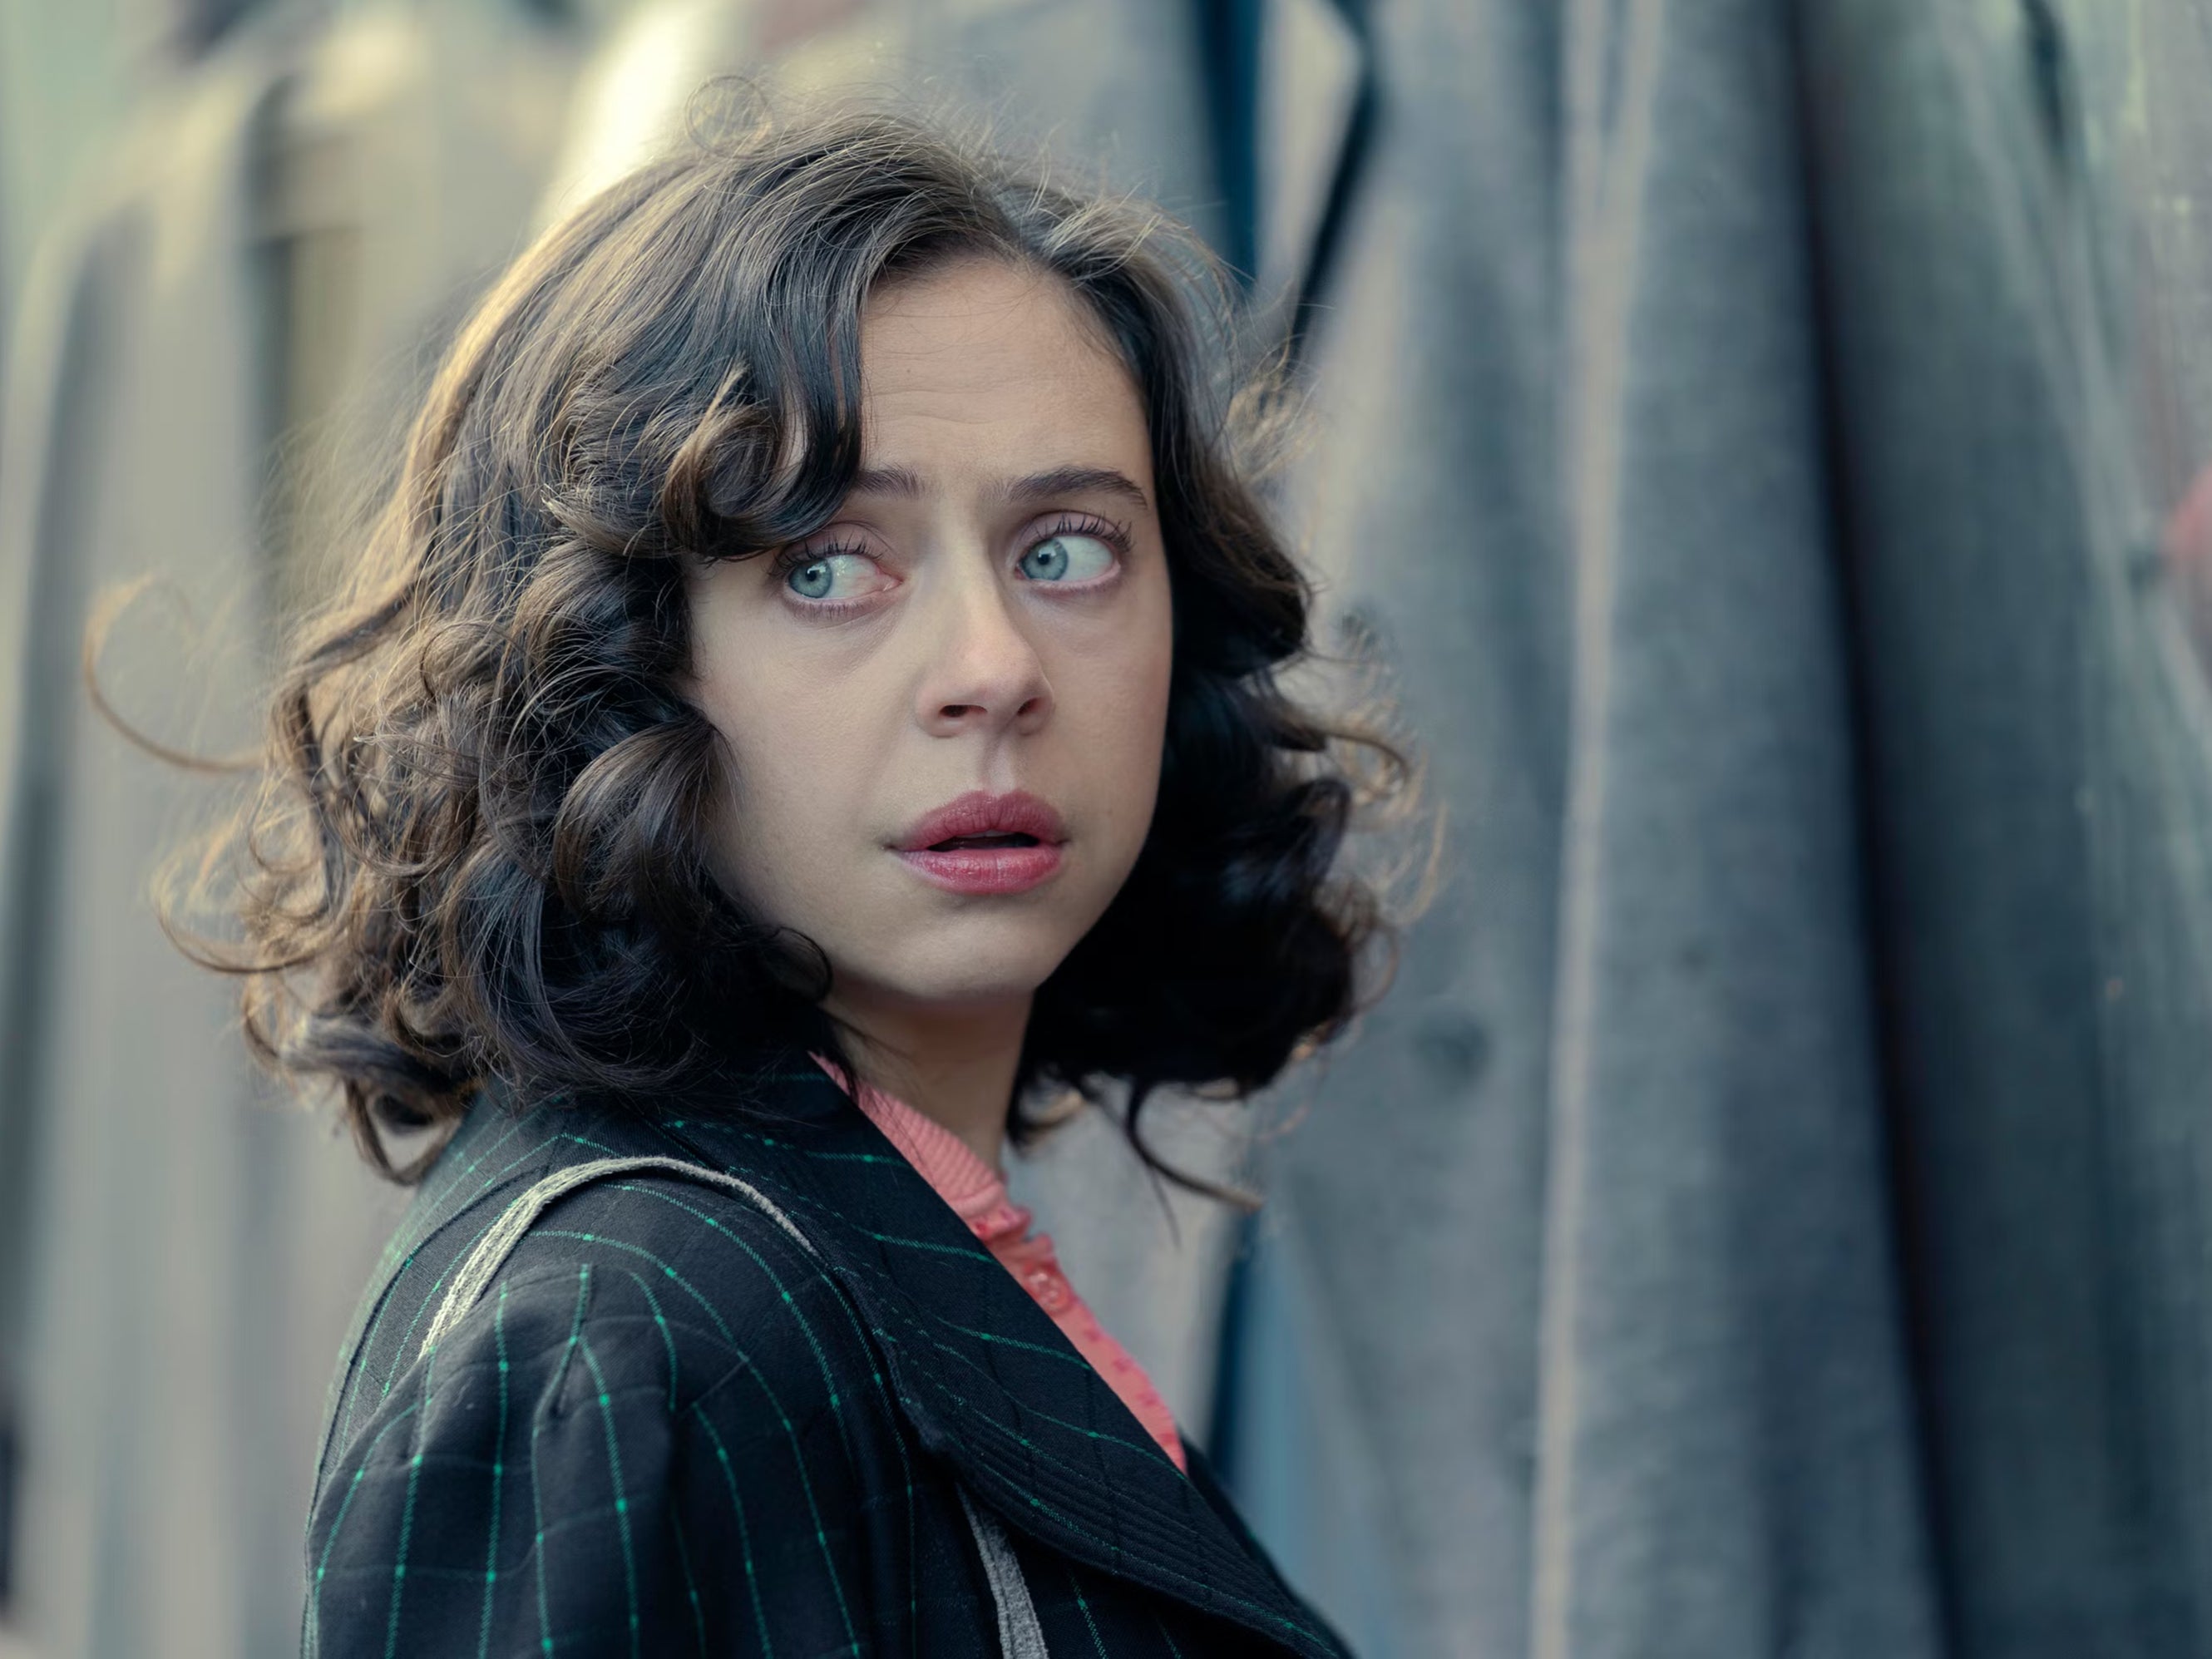 Bel Powley on Botox, nepotism and difficult sex scenes: 'The heroin chic  thing is gonna die again, right?' | The Independent